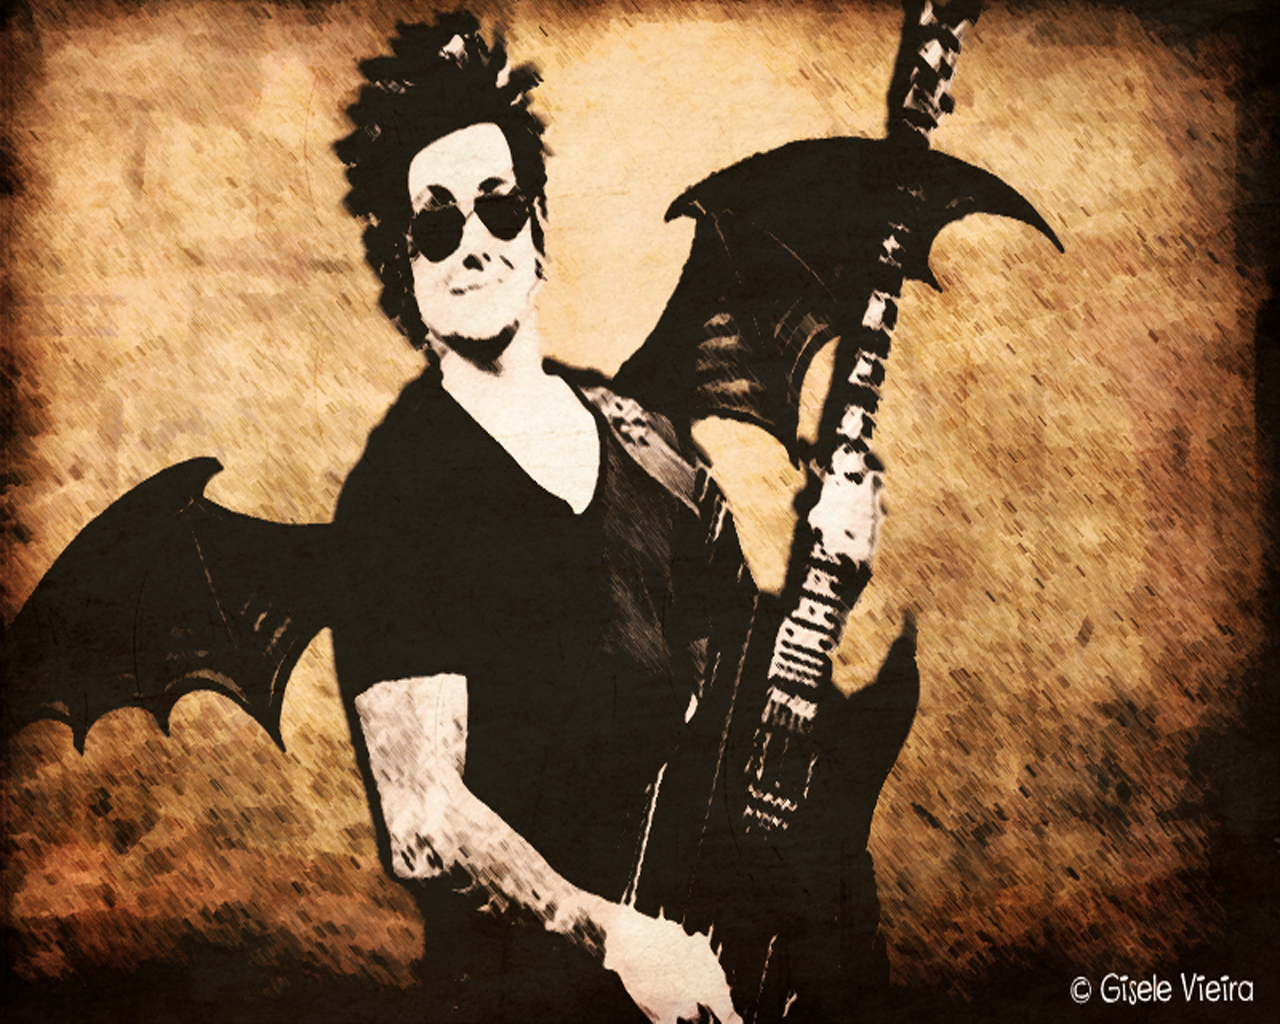 Free Download Wallpaper Synyster Gates By Giivieiraf Fan Art Wallpaper Other 12 1280x1024 For Your Desktop Mobile Tablet Explore 78 Synyster Gates Wallpaper Synyster Gates Wallpaper Synyster Gates 16 Wallpaper Synyster Gates 17 Wallpaper